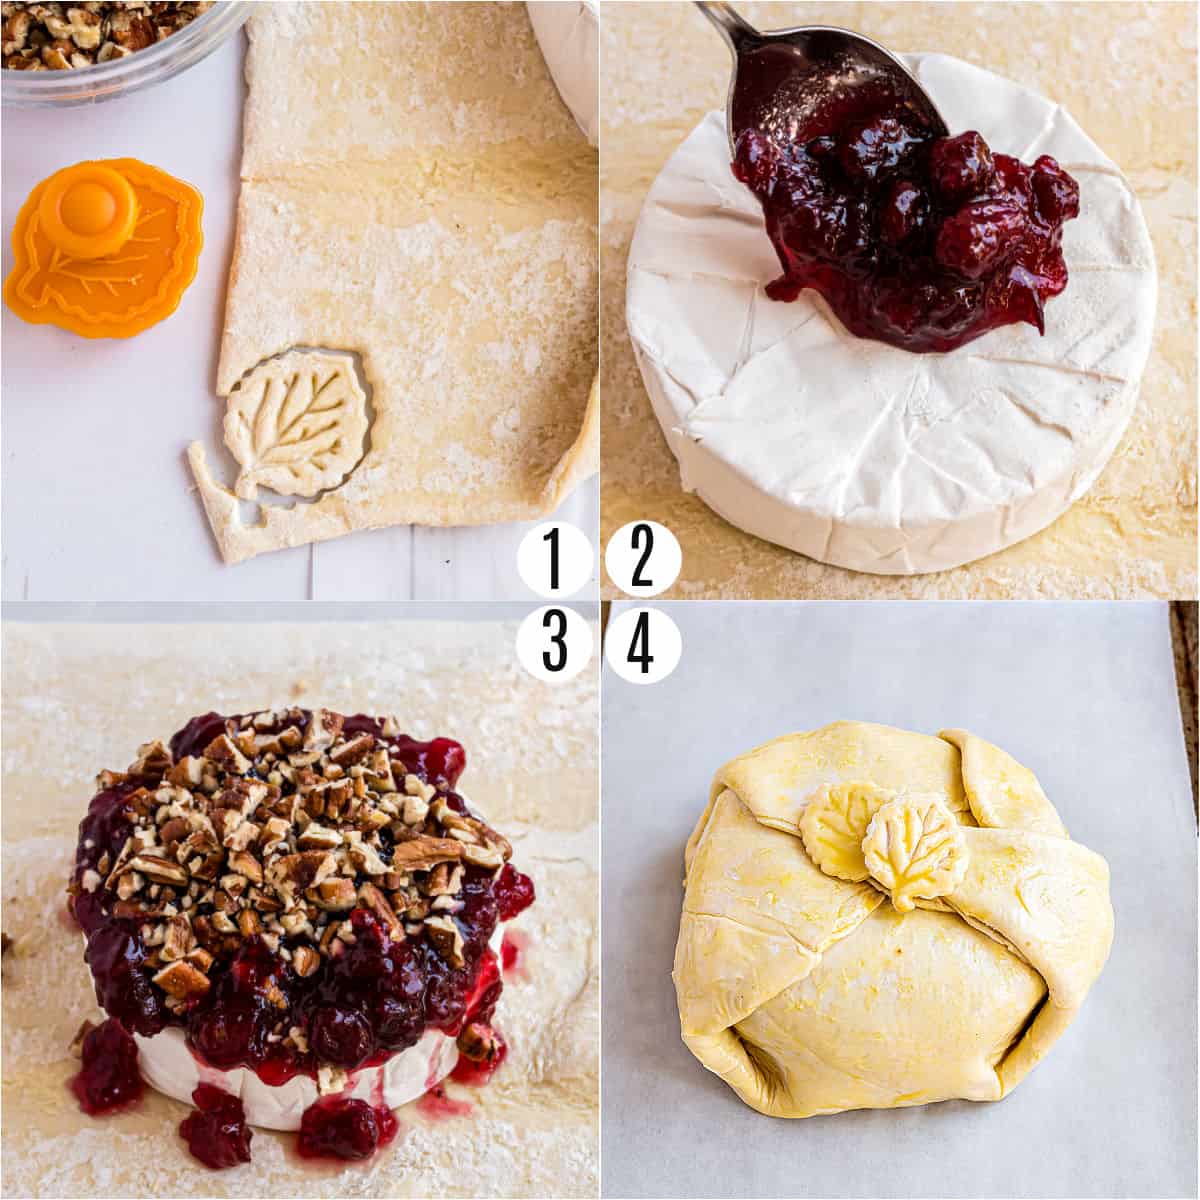 Step by step photos showing how to make puff pastry wrapped brie.